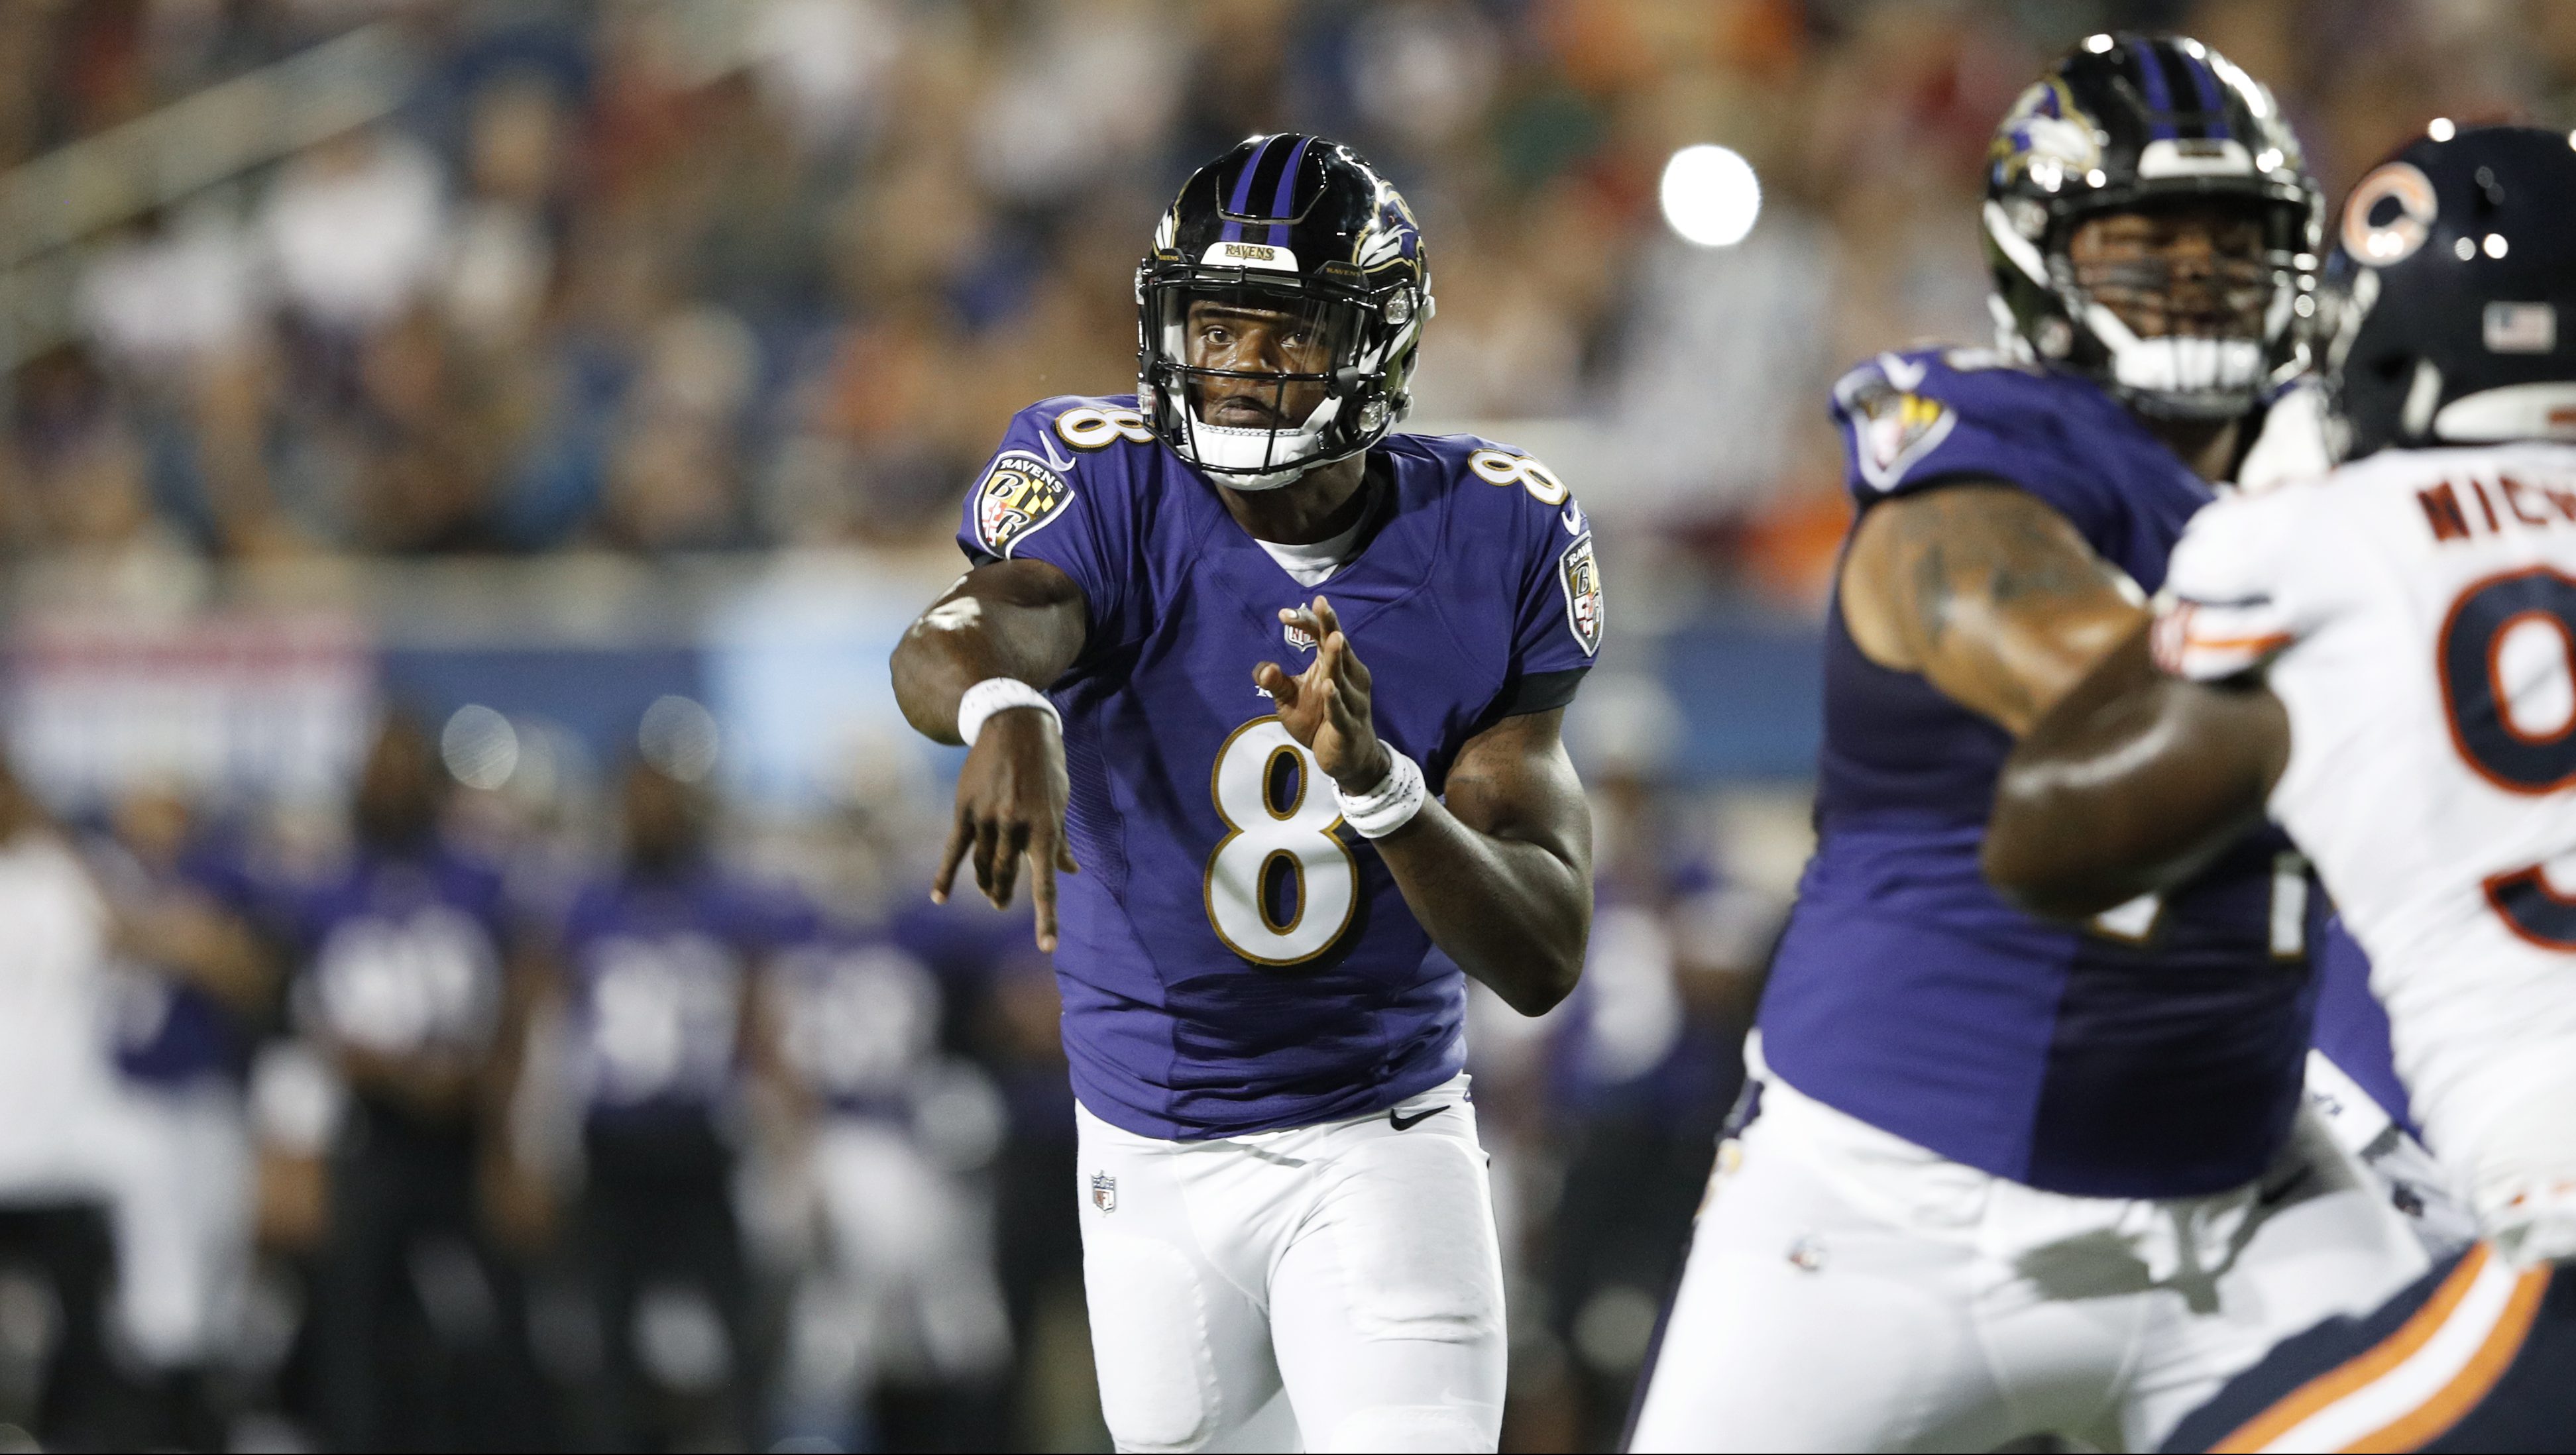 Lamar Jackson Highlights & Stats From NFL Debut